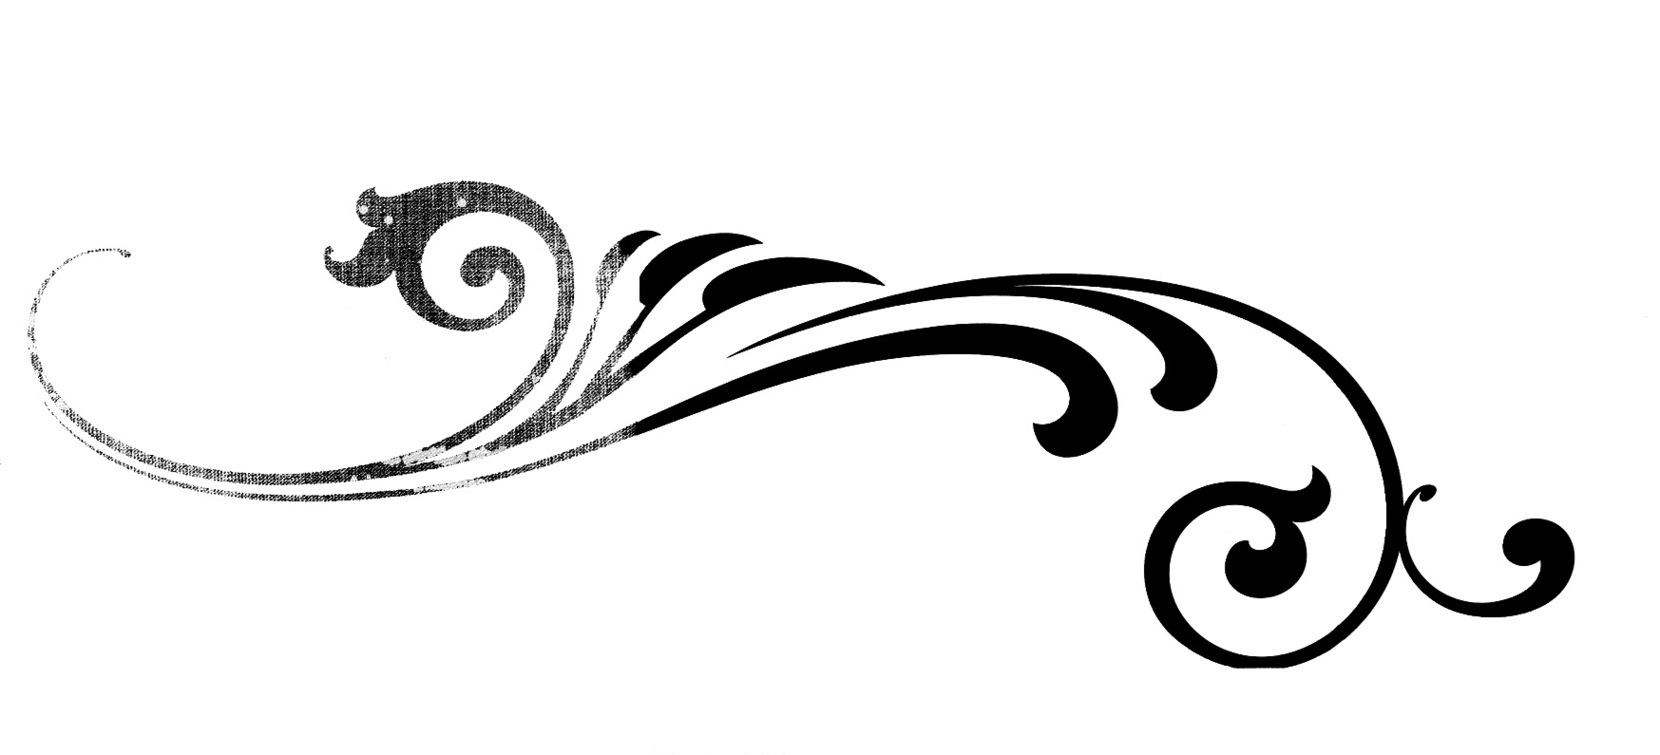 Simple Flourish Clipart - Free to use Clip Art Resource